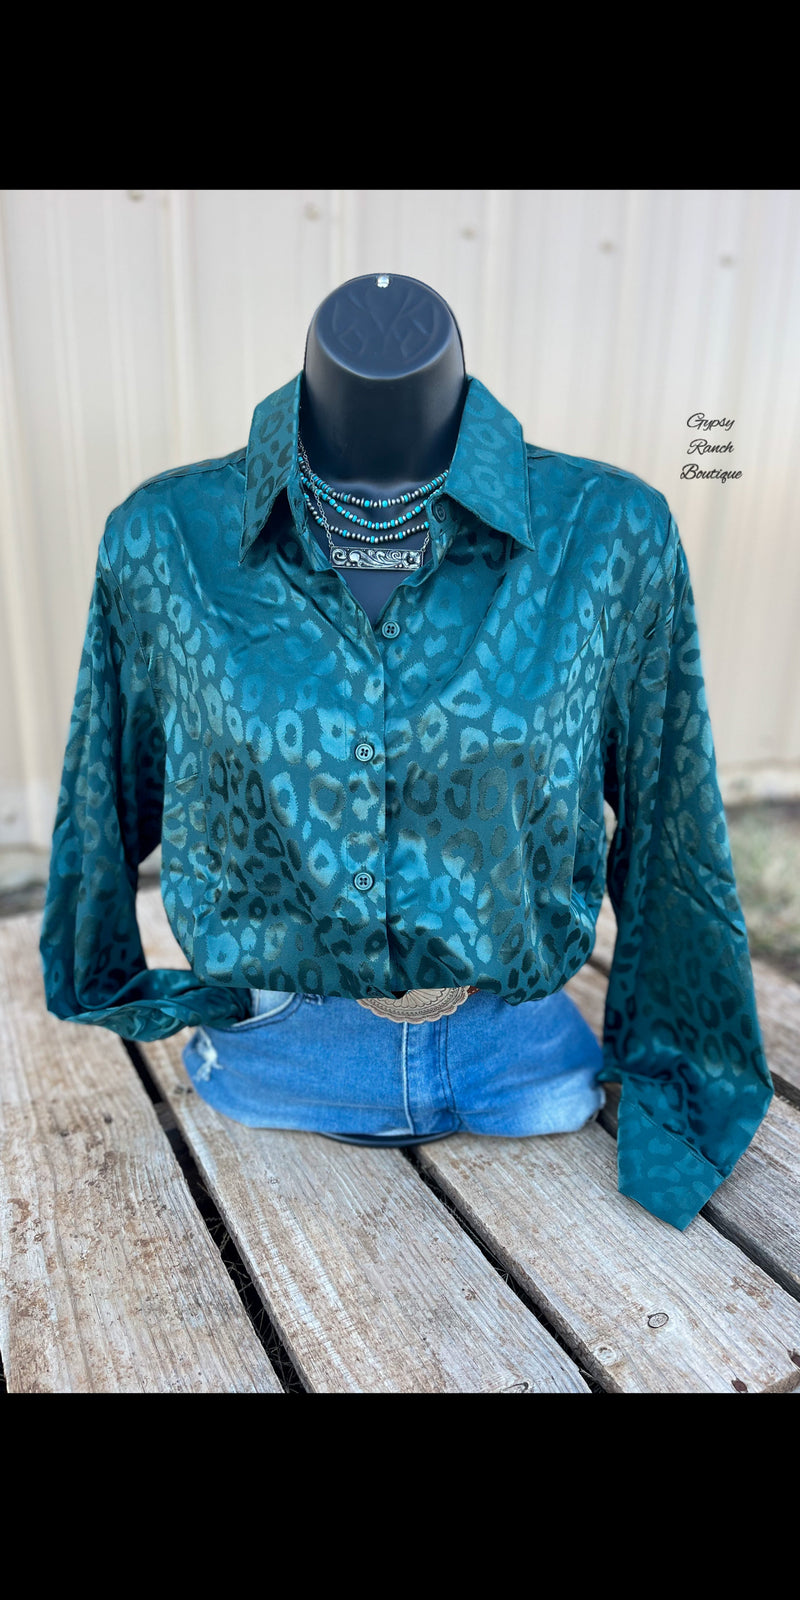 Emerald City Leopard Top - Also in Plus Size